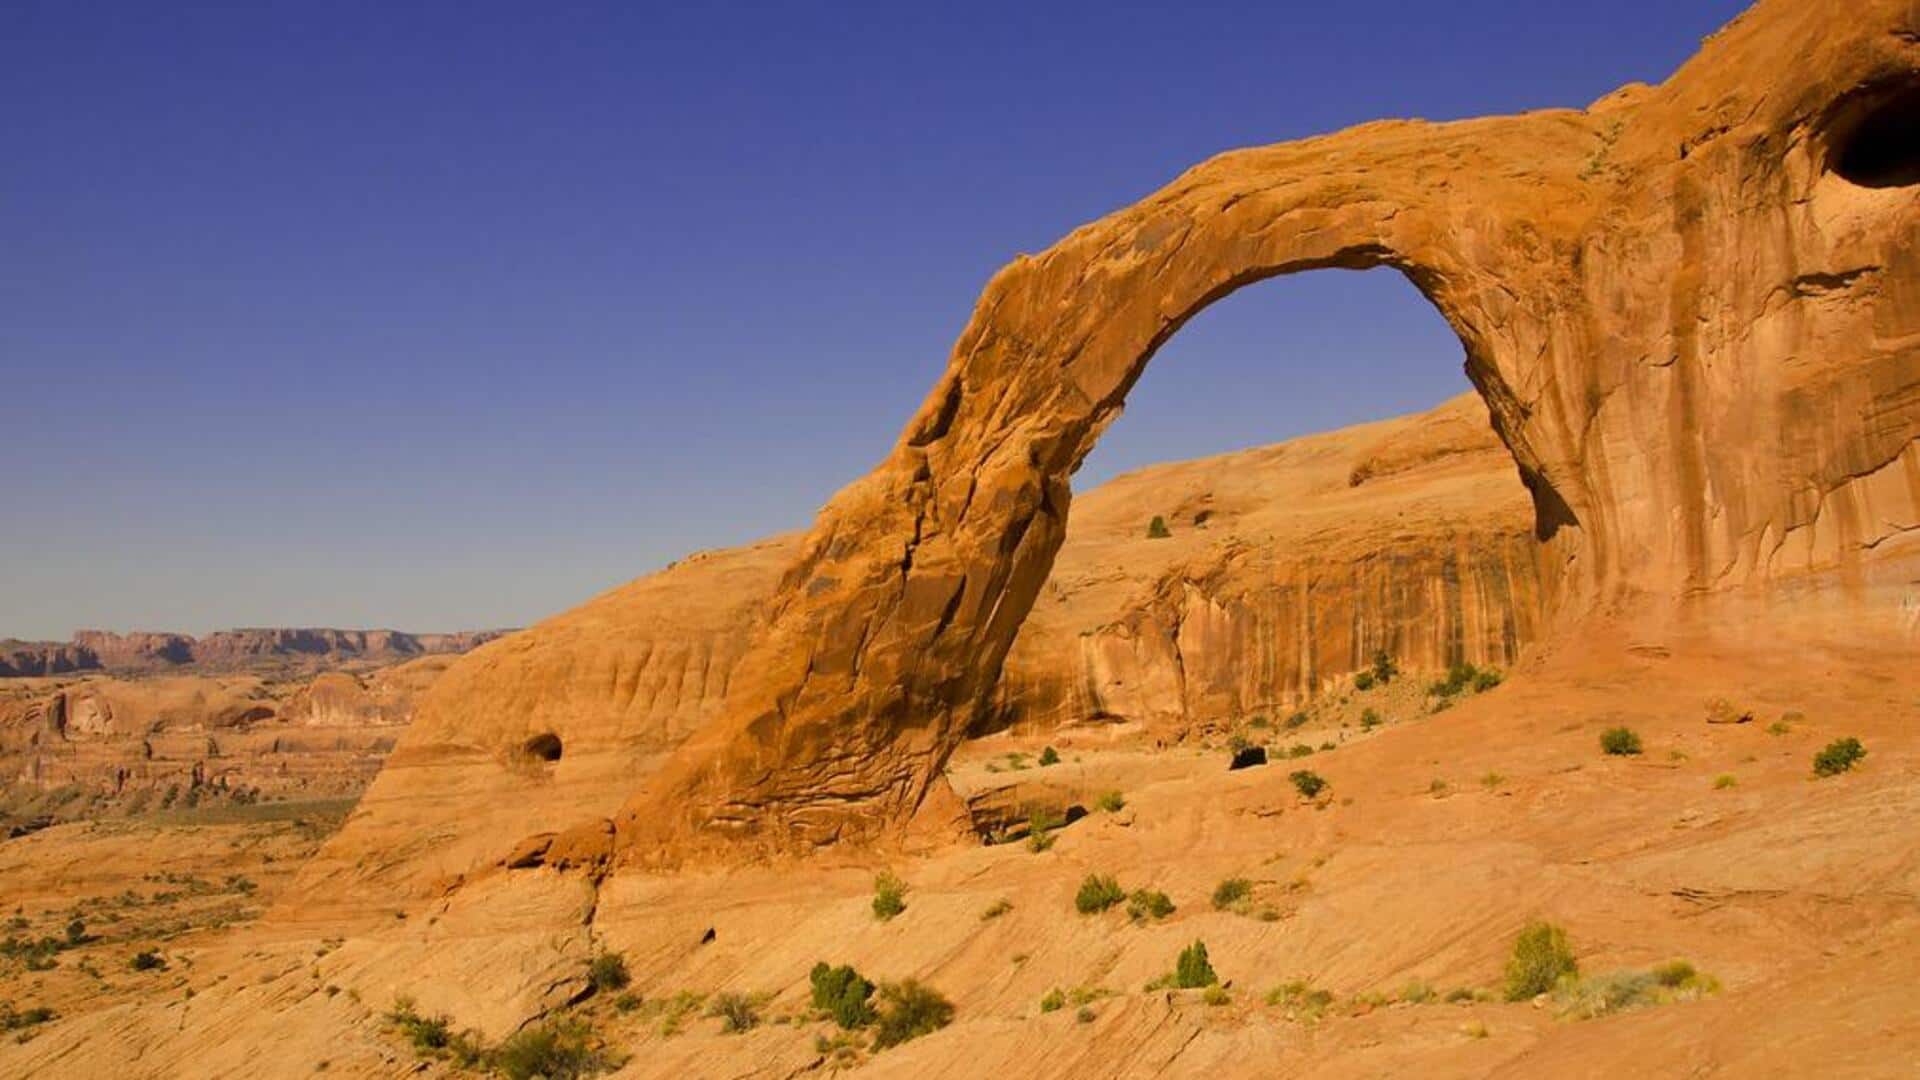 Interesting things to do when in Moab, Utah